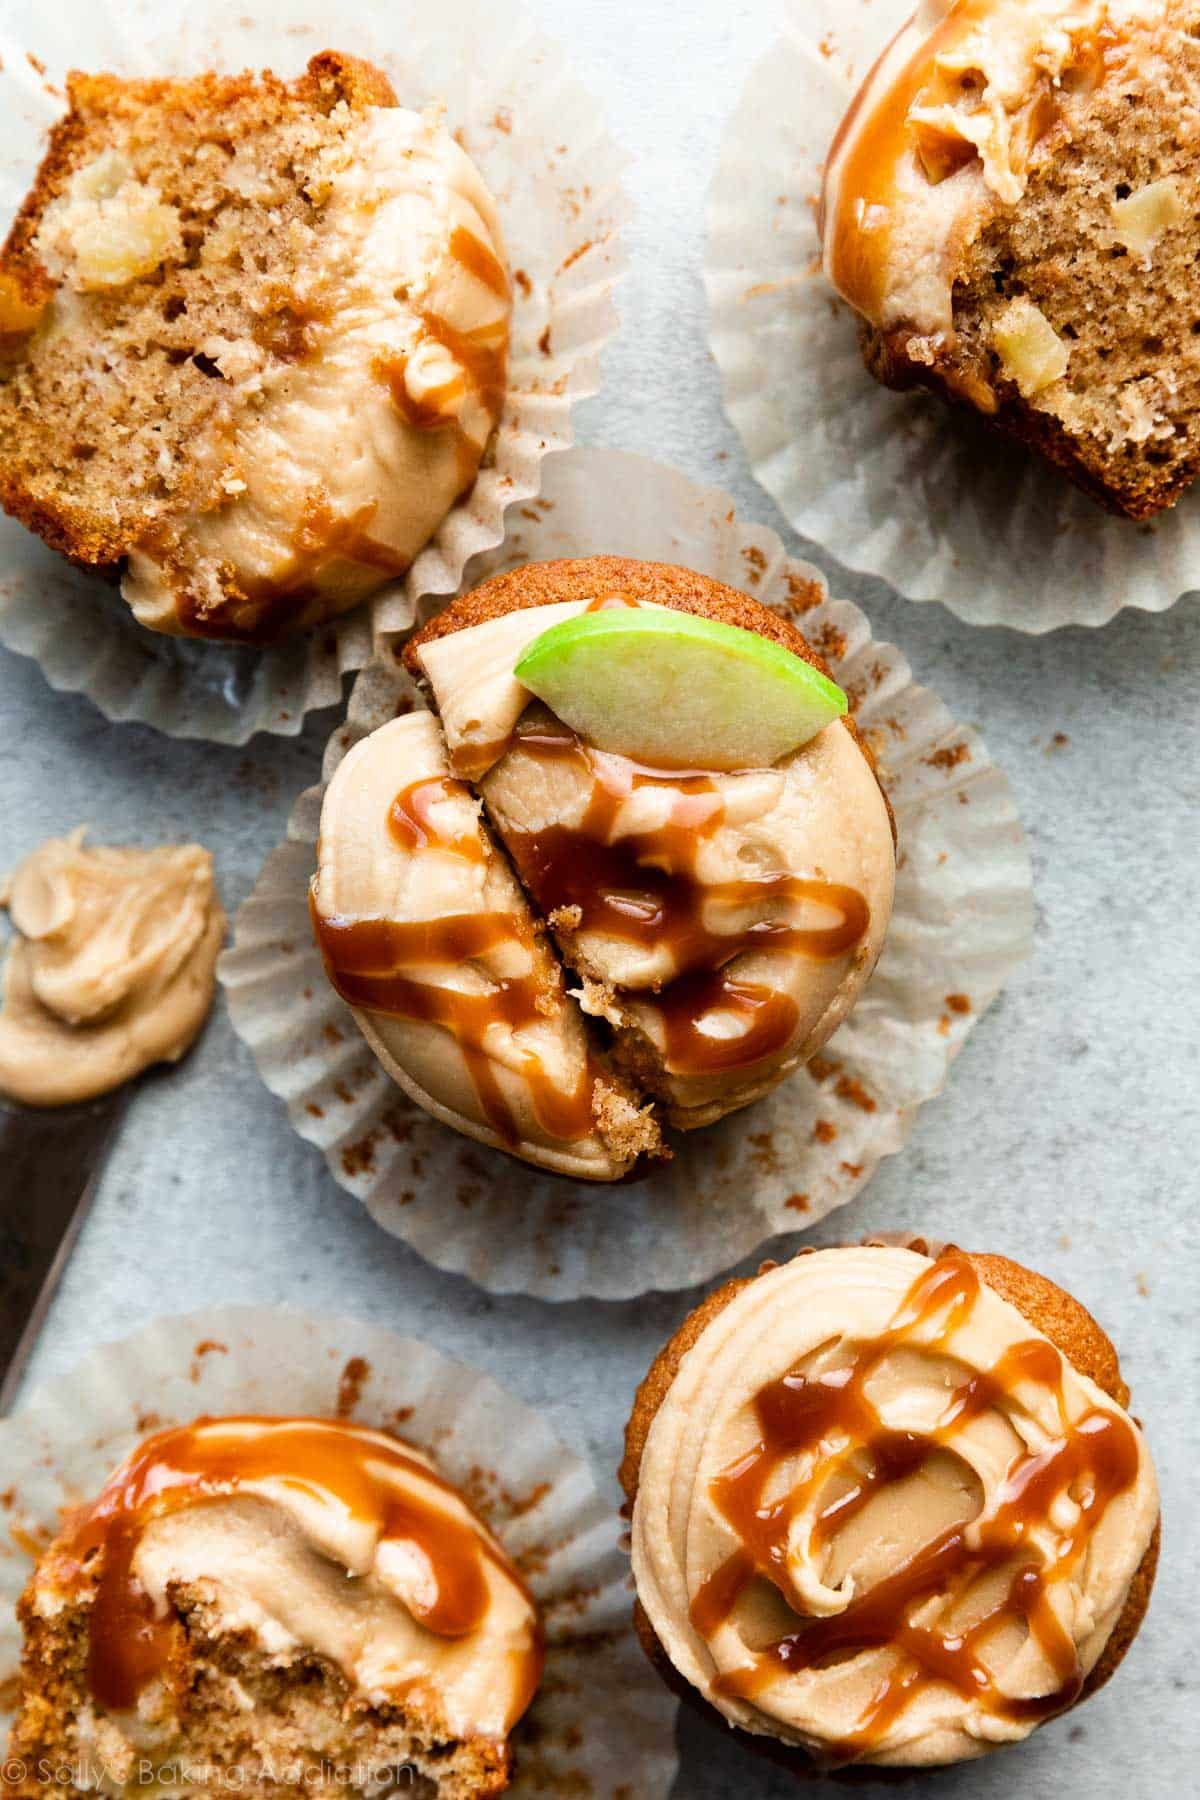 5 caramel apple cupcakes with salted caramel drizzled on top and a few cut in half.